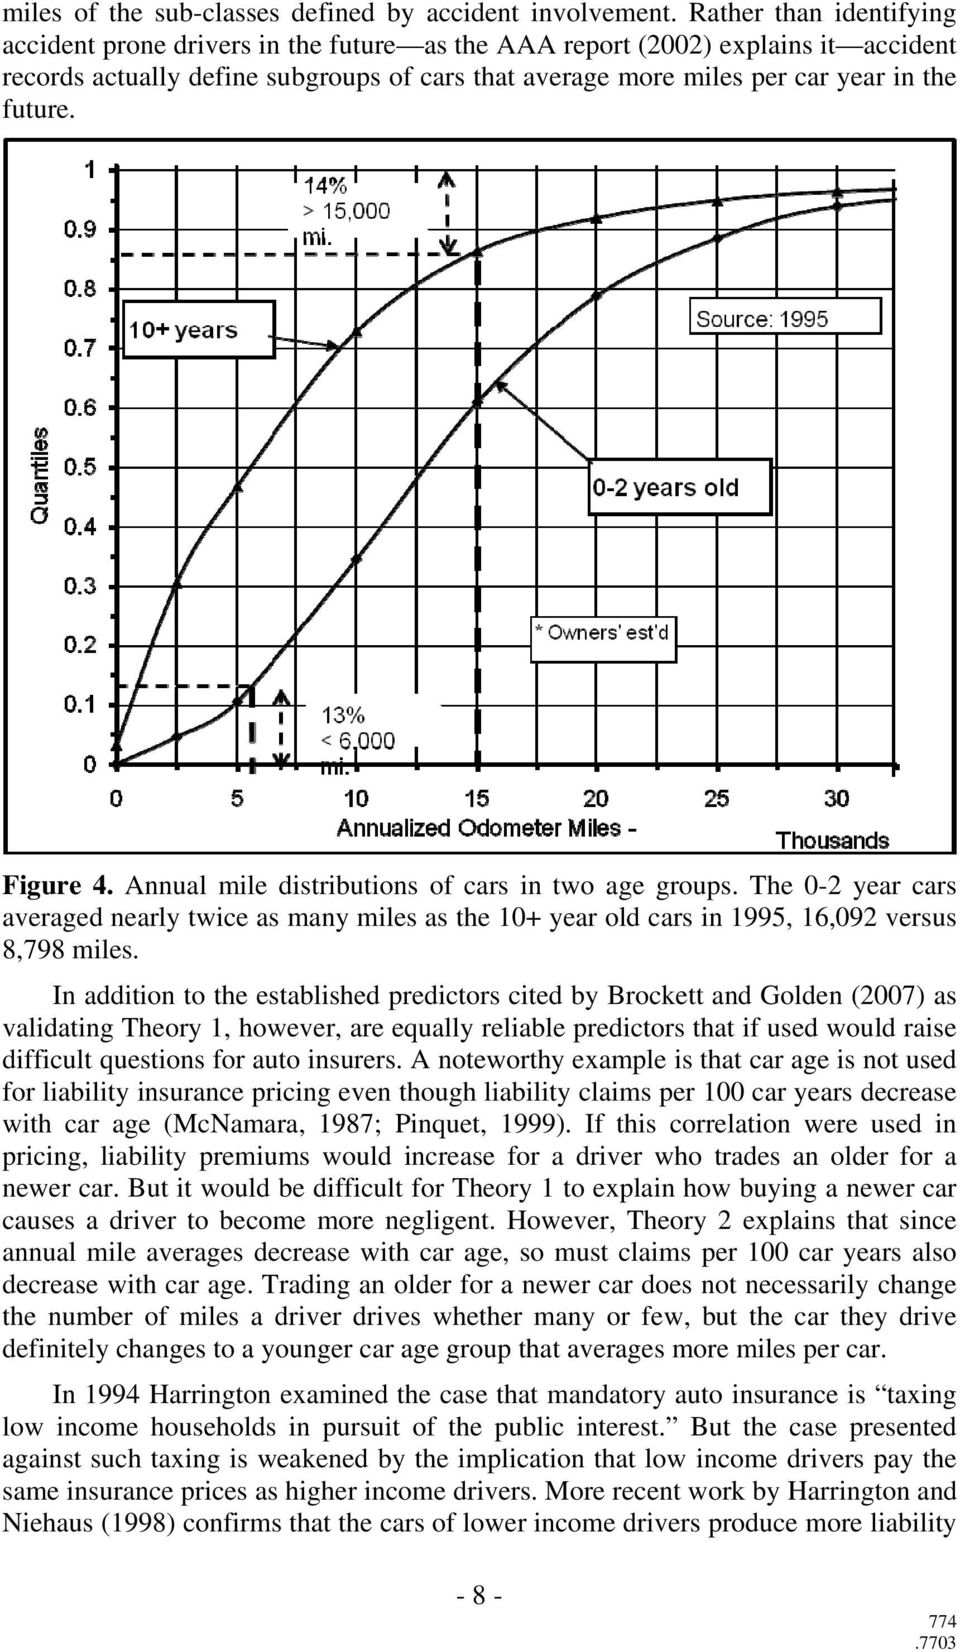 Figure 4. Annual mile distributions of cars in two age groups. The 0-2 year cars averaged nearly twice as many miles as the 10+ year old cars in 1995, 16,092 versus 8,798 miles.